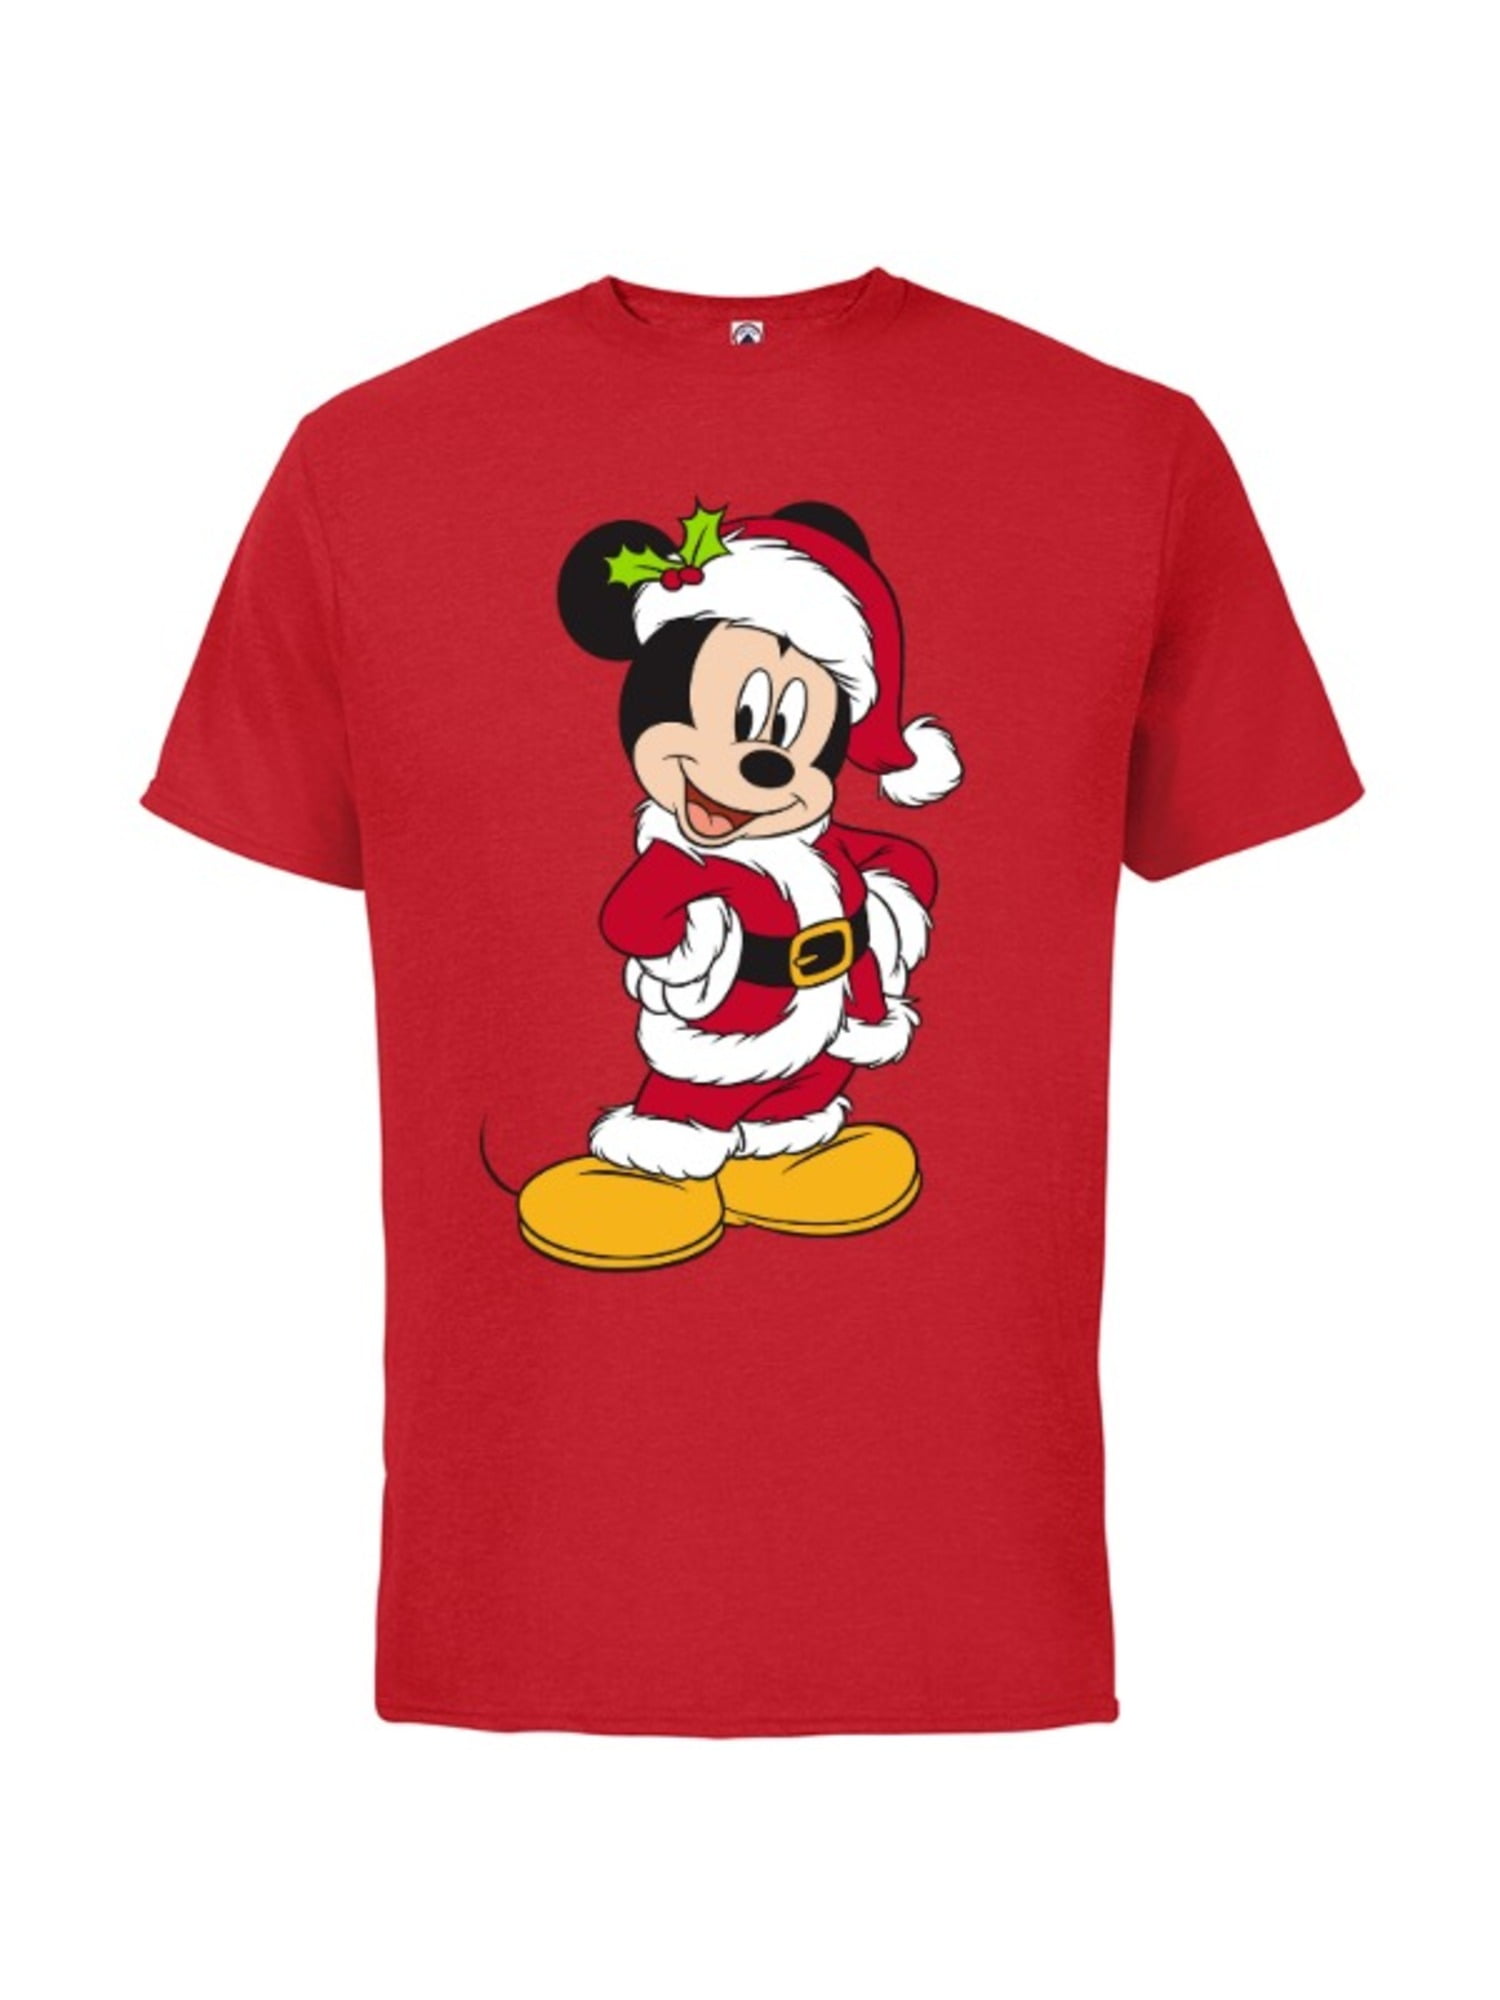 Disney Santa Mickey Mouse Holiday - Short Sleeve Cotton T-Shirt for Adults  -Customized-Red